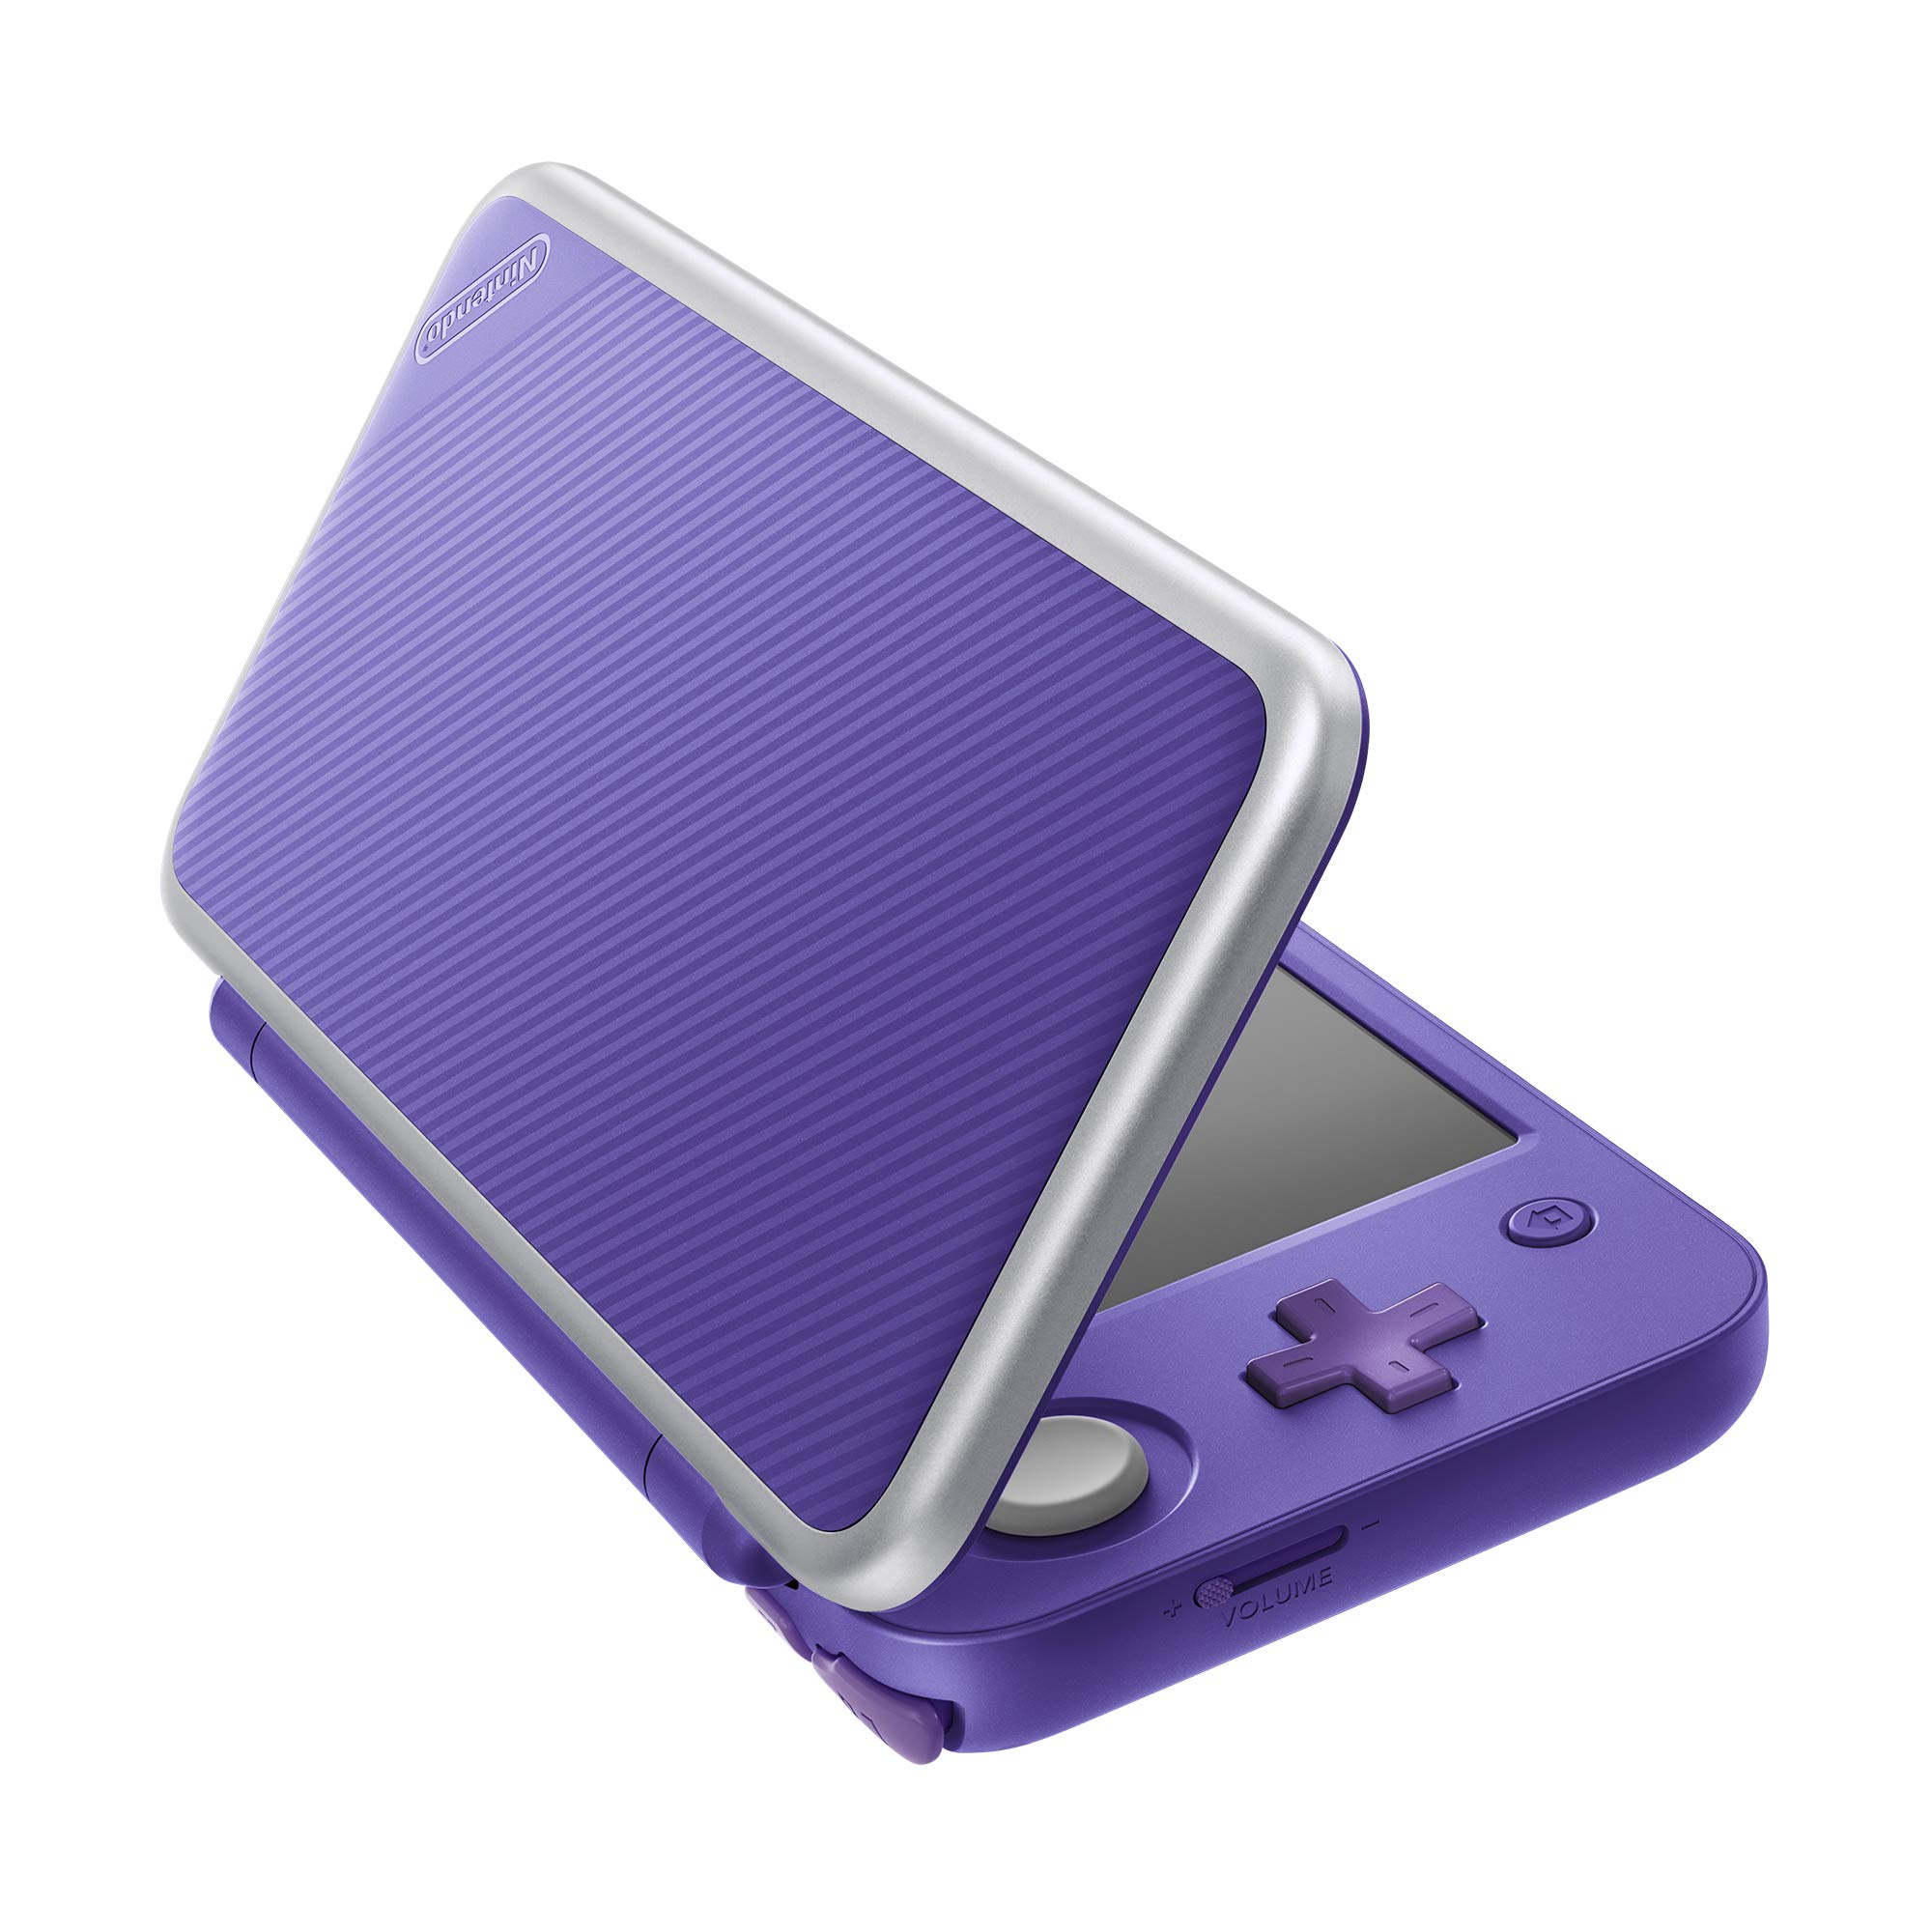 New Nintendo 2DS XL - Purple + Silver With Mario Kart 7 Pre-installed - Nintendo 2DS